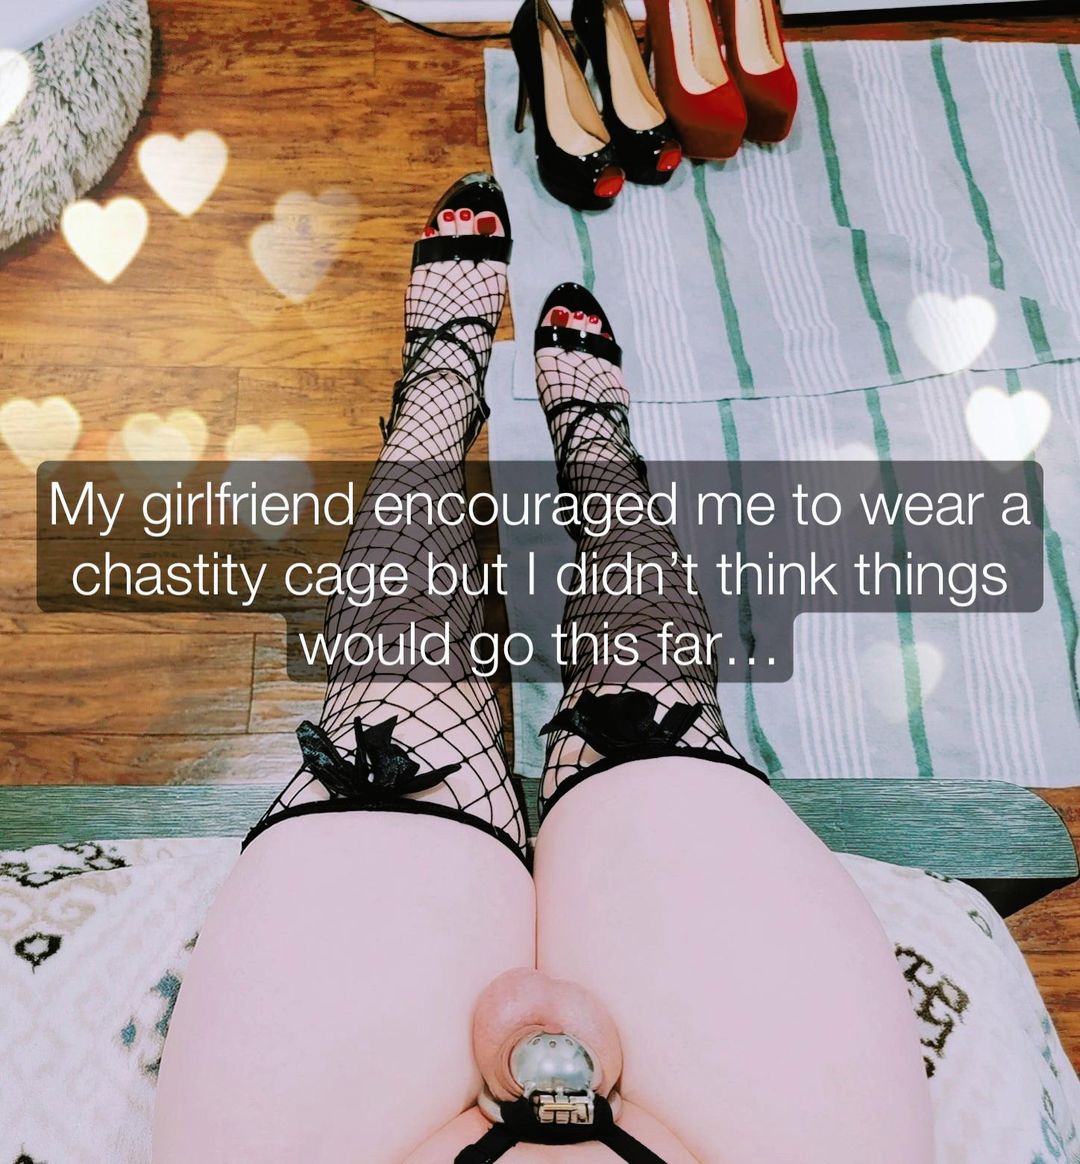 Girlfriend used chastity to feminize him into a sissy pic